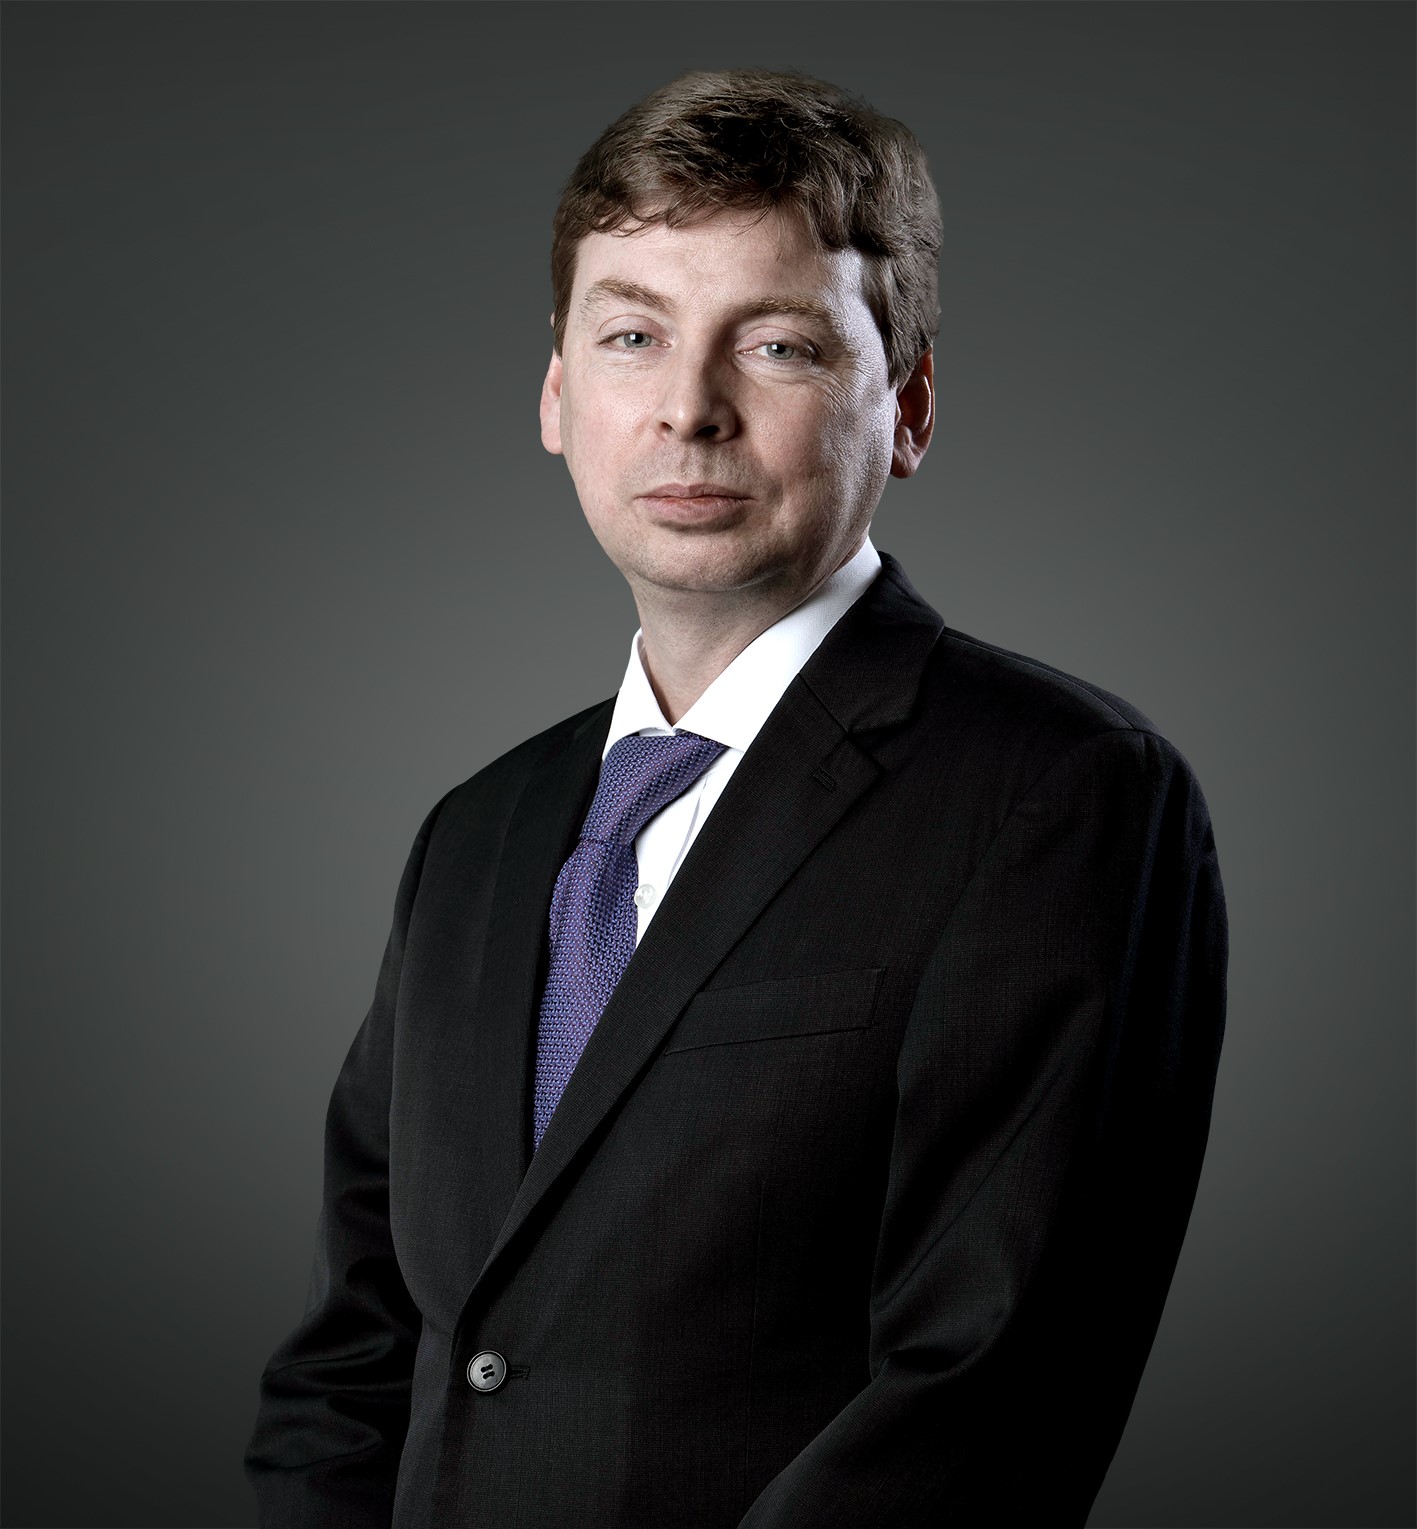 Phil Haworth, Head of Equities bei Aegon Asset Management